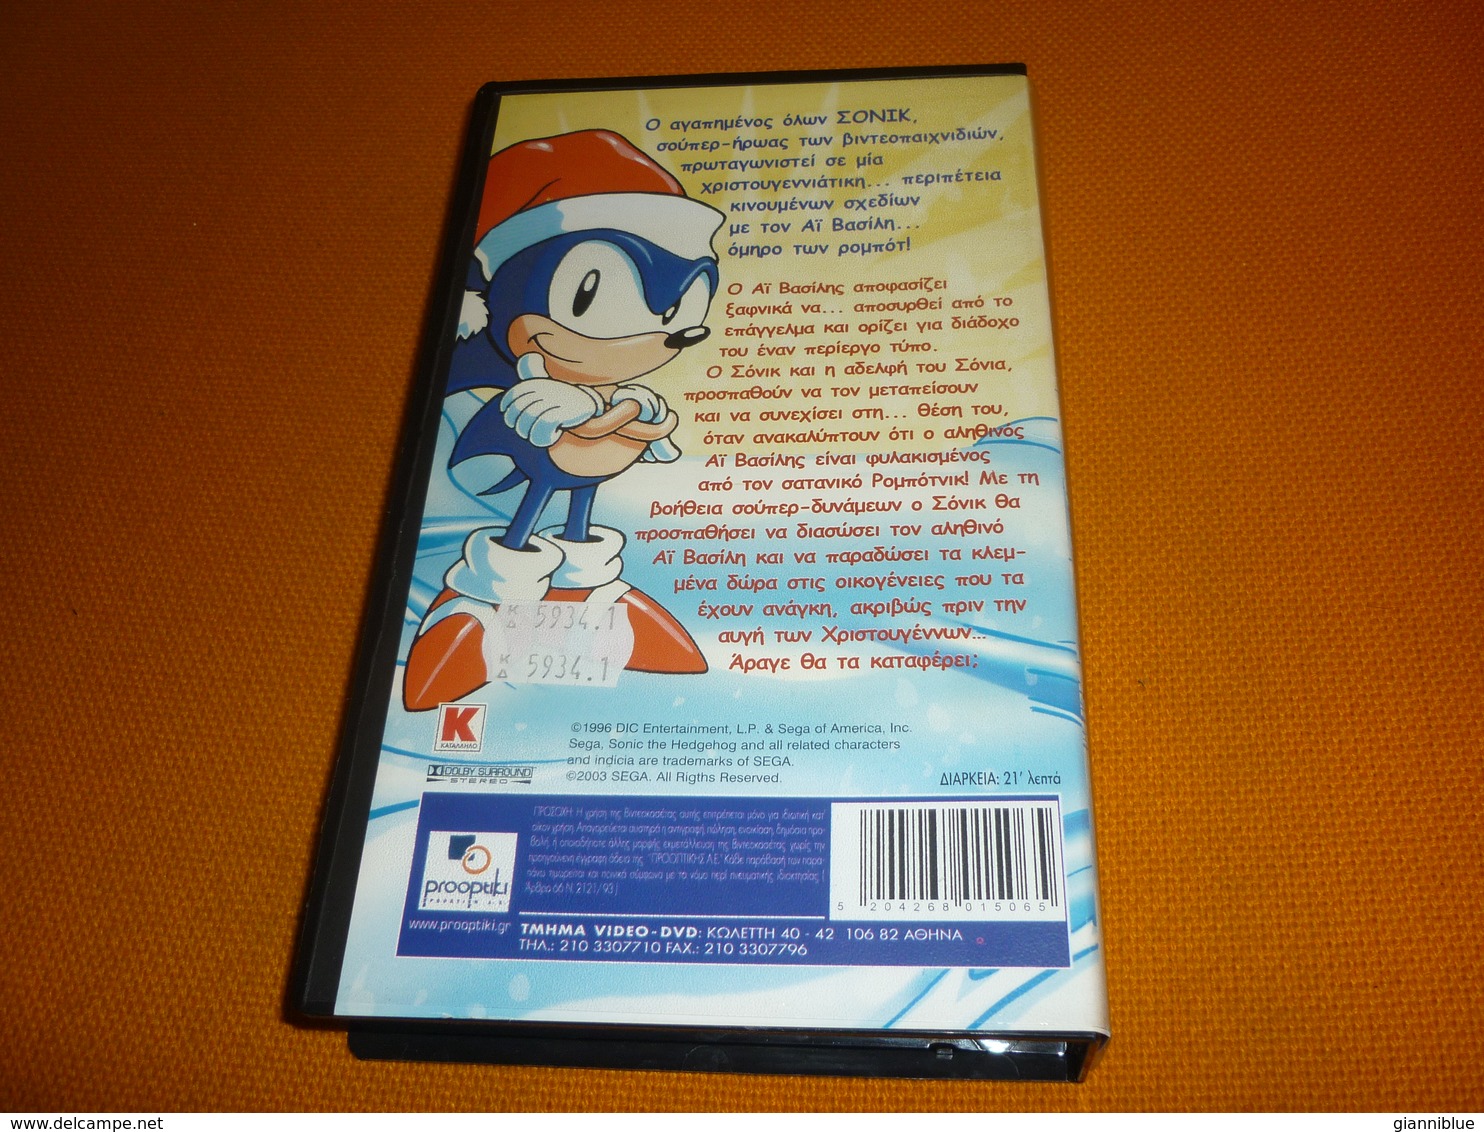 Sonic The Hedgehog Old Greek Vhs Cassette Video Tape From Greece - Cartoons